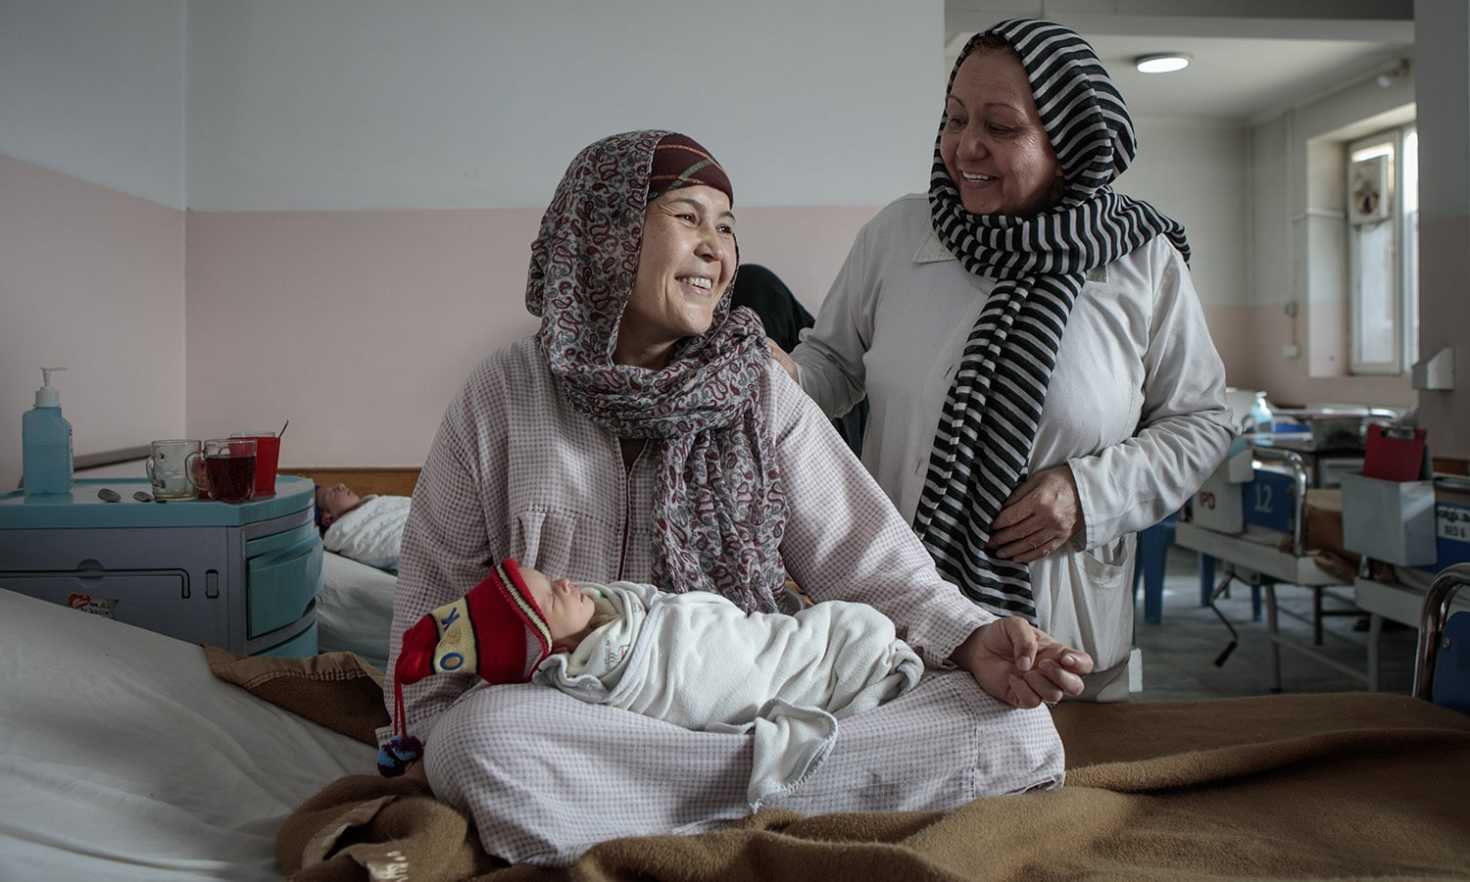 New mother Zakia holds one of her twins in the maternity wing of Dasht-e-Barchi hospital in Kabul as an MSF midwife checks on her. (Photo credit/copyright Sandra Calligaro)